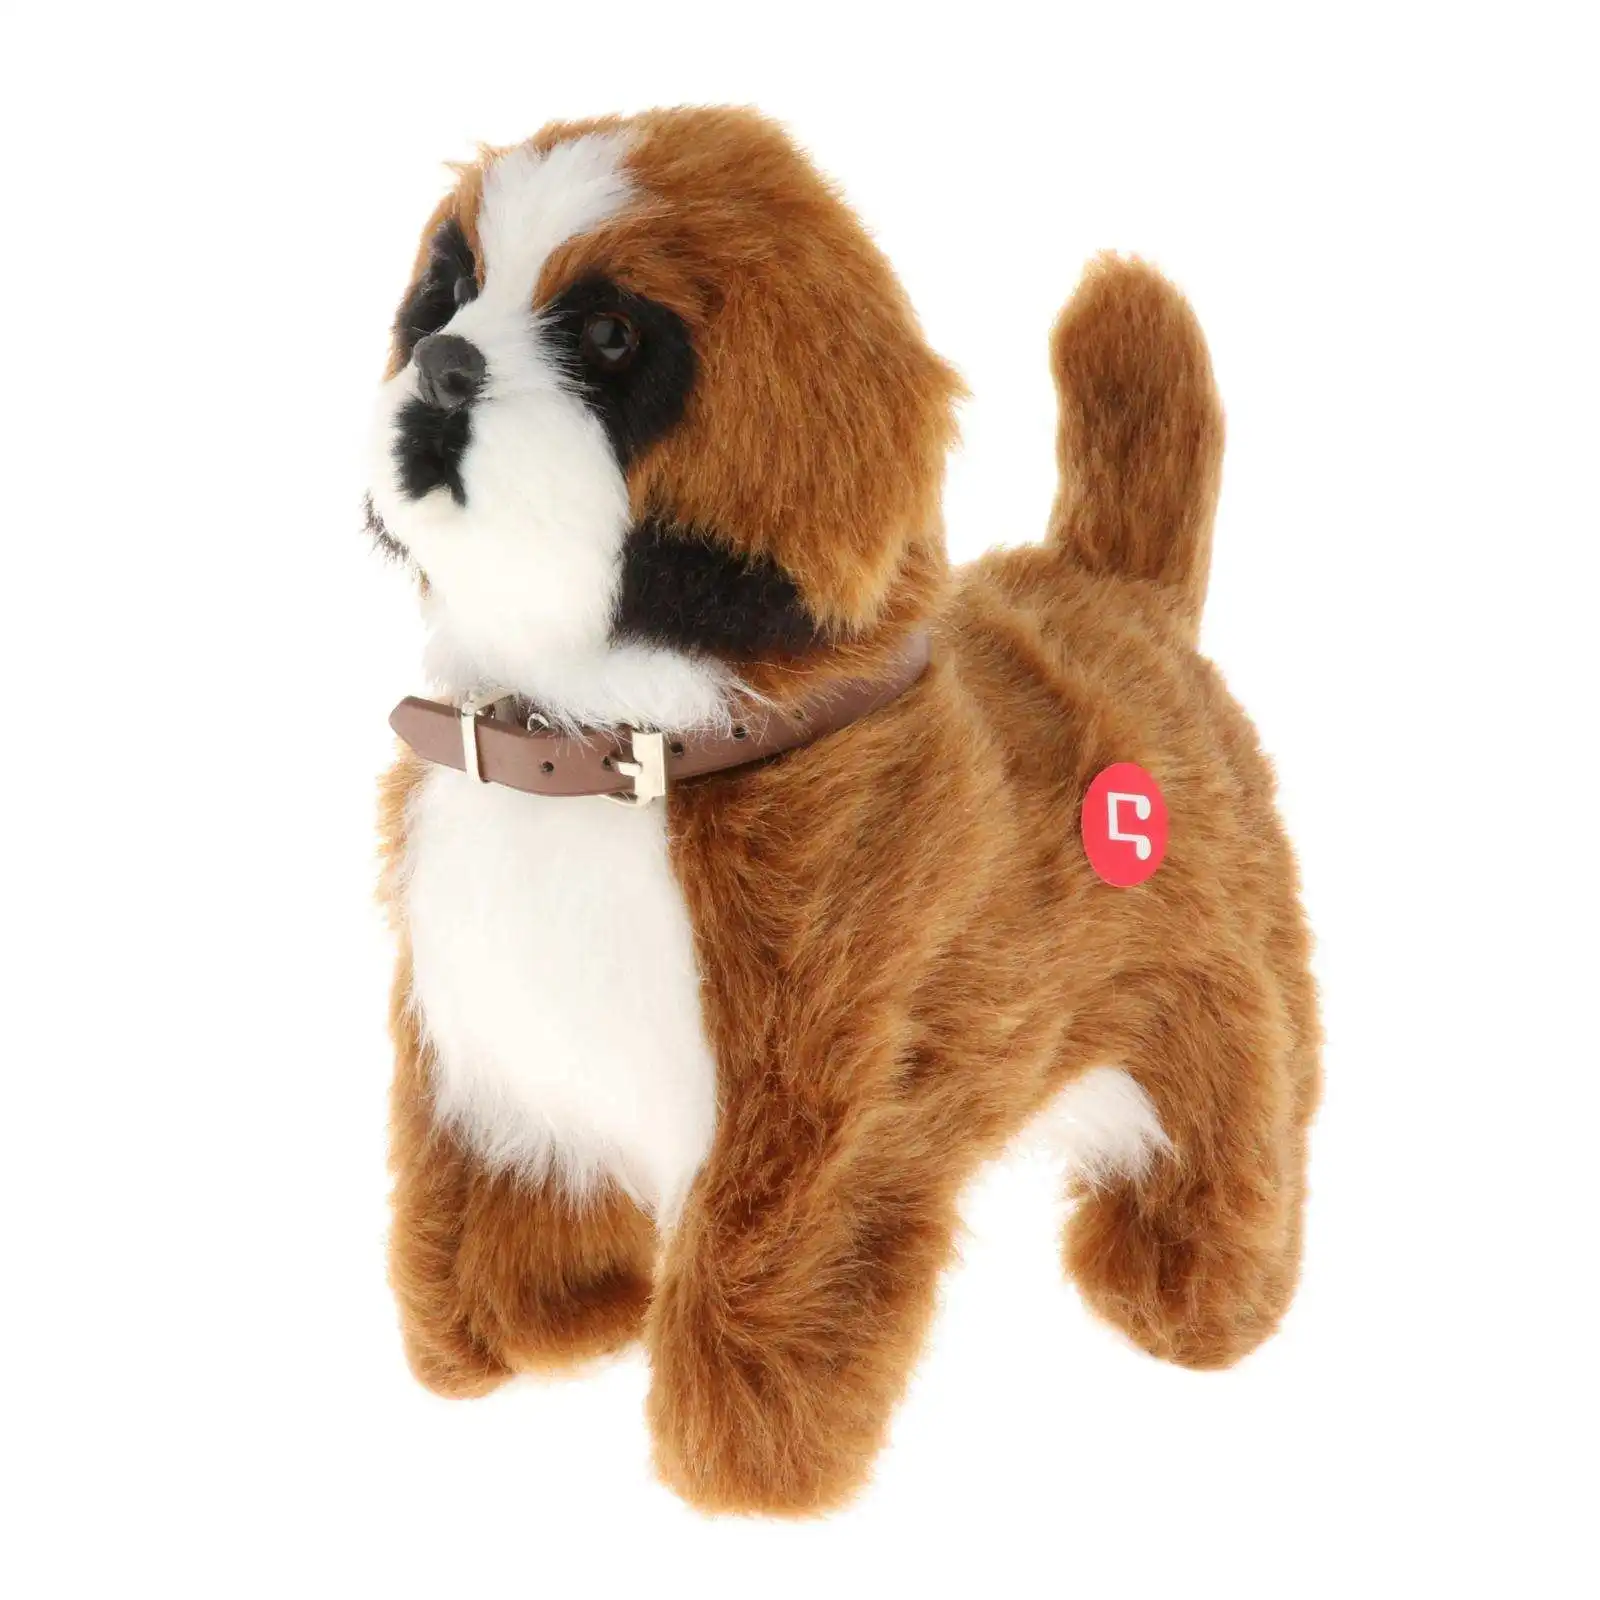 Soft Electronic Pet Interactive Early Learning Battery Operated Puppy Toy Stuffed Animals Doll for Christmas Present Boys Girls